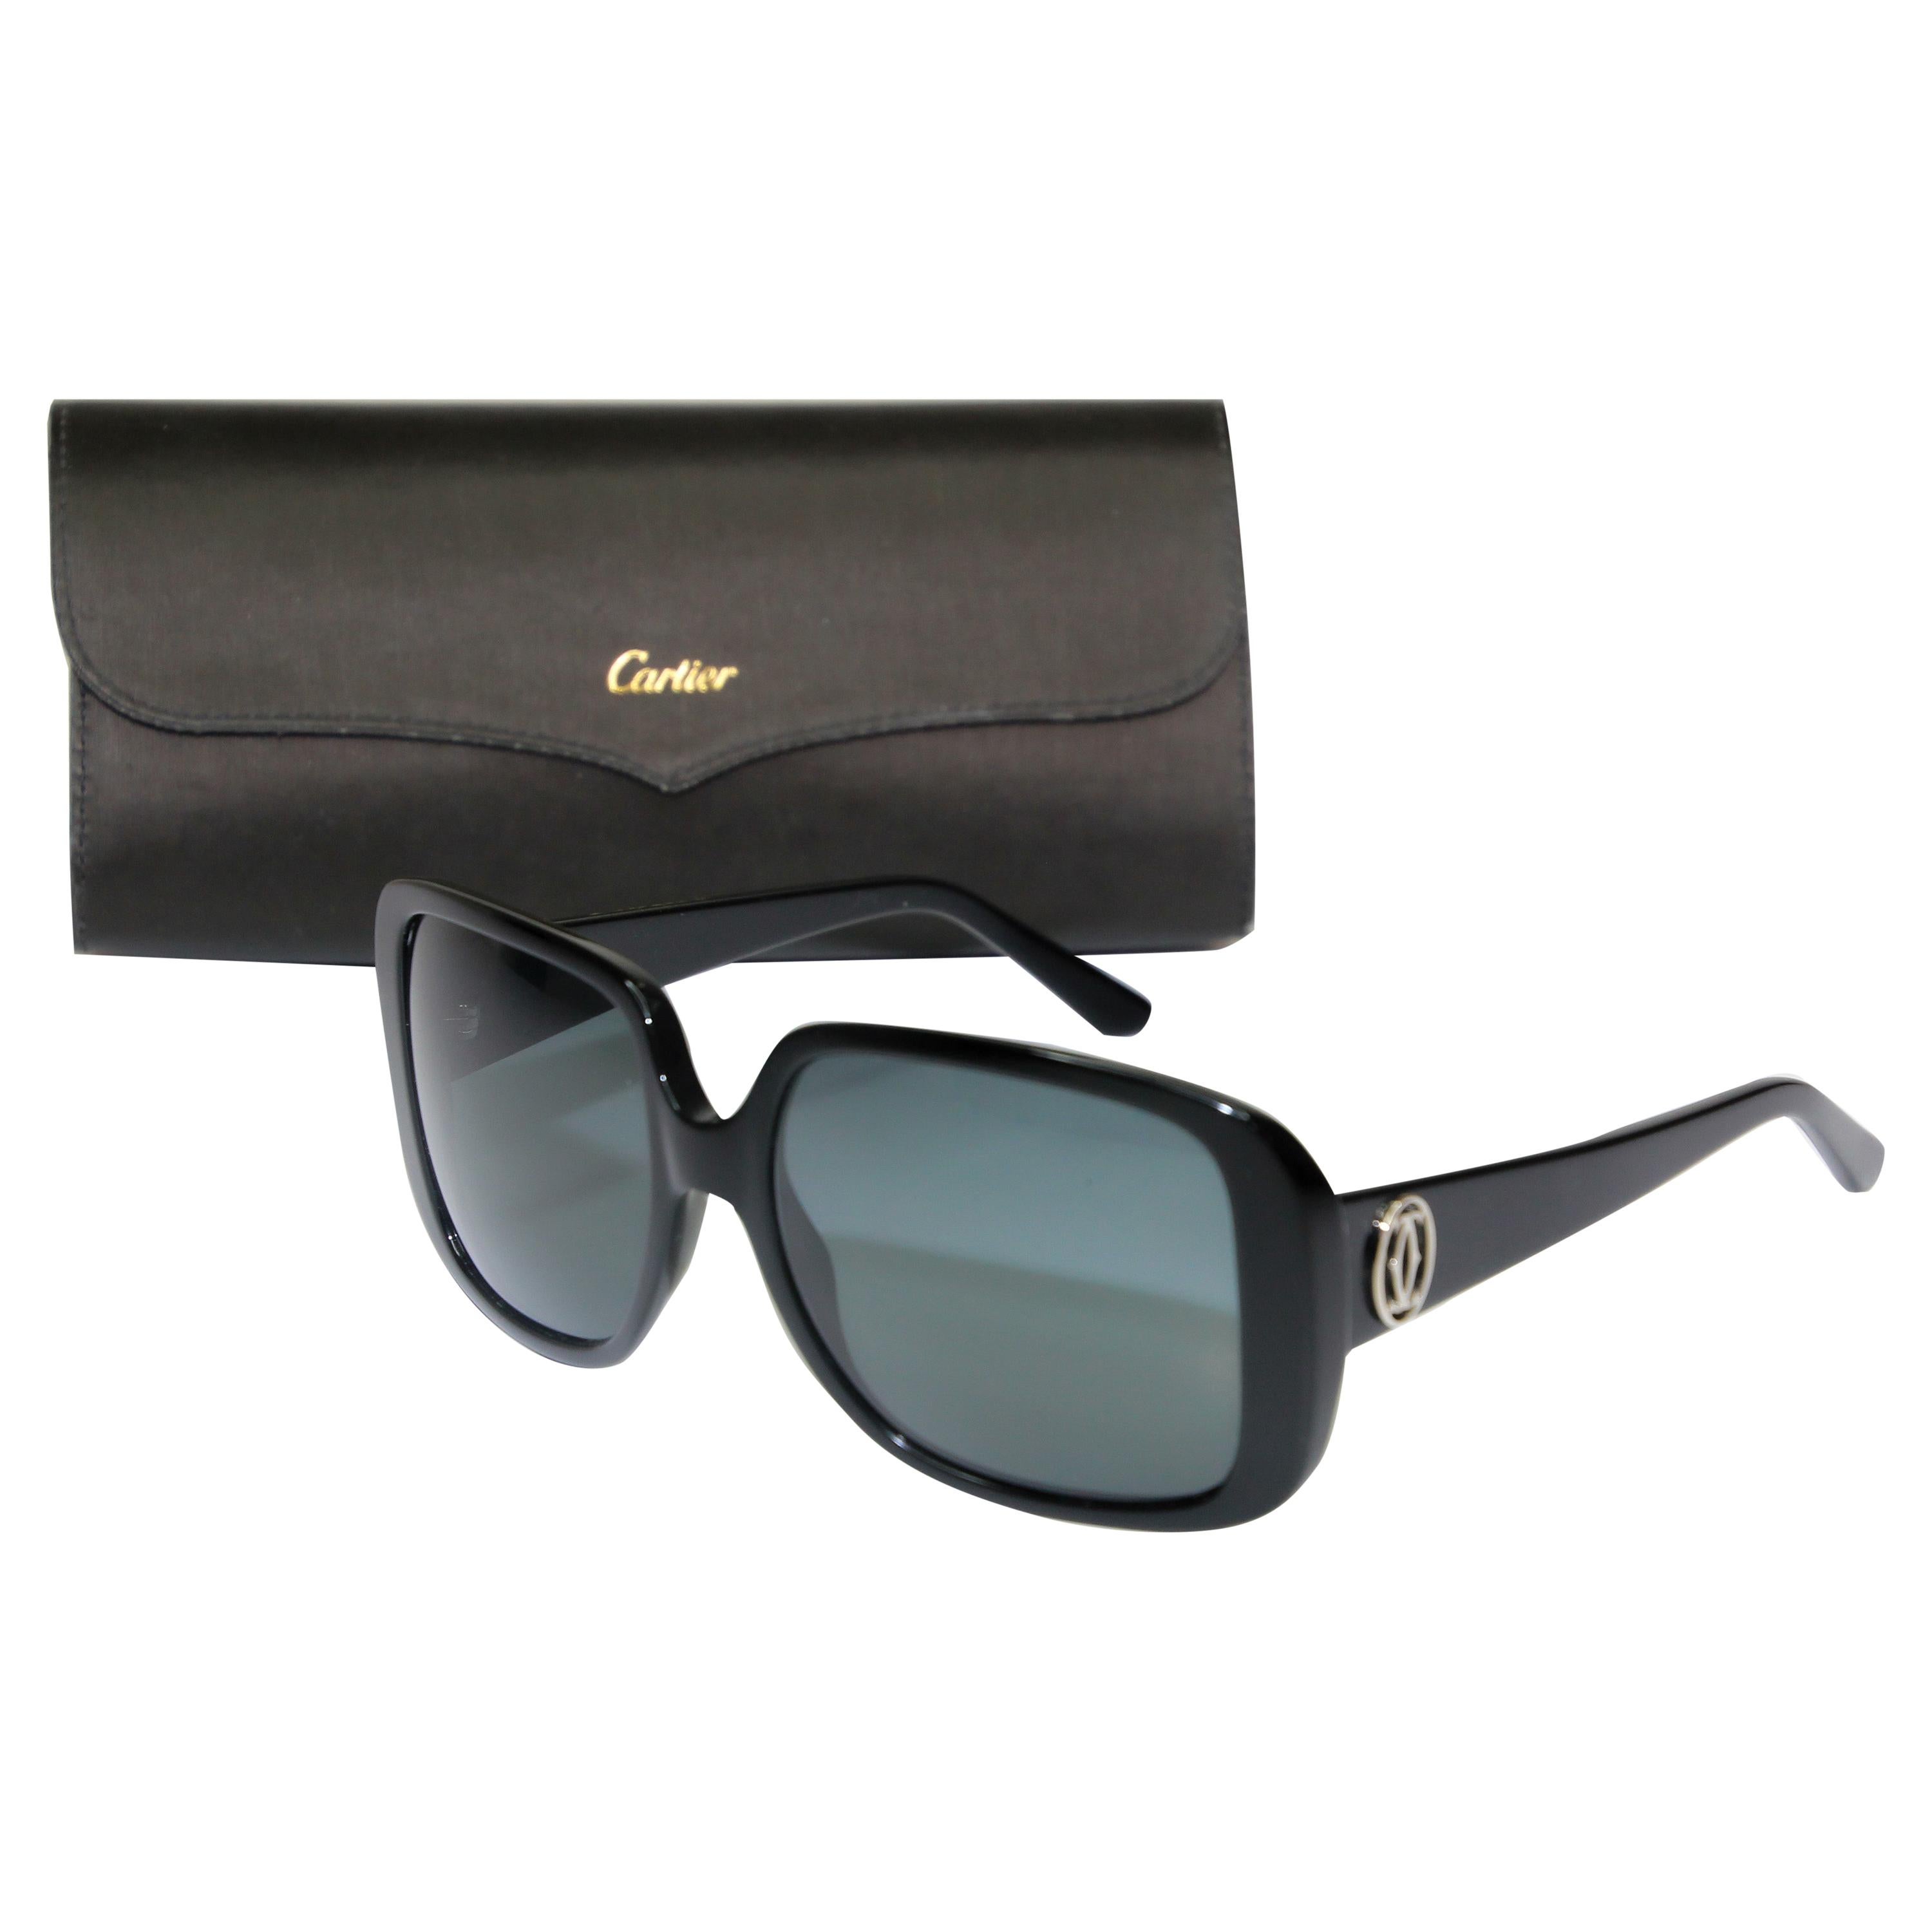 Cartier Vintage Black Sunglasses with Box, 1990 Silver Logo For Sale